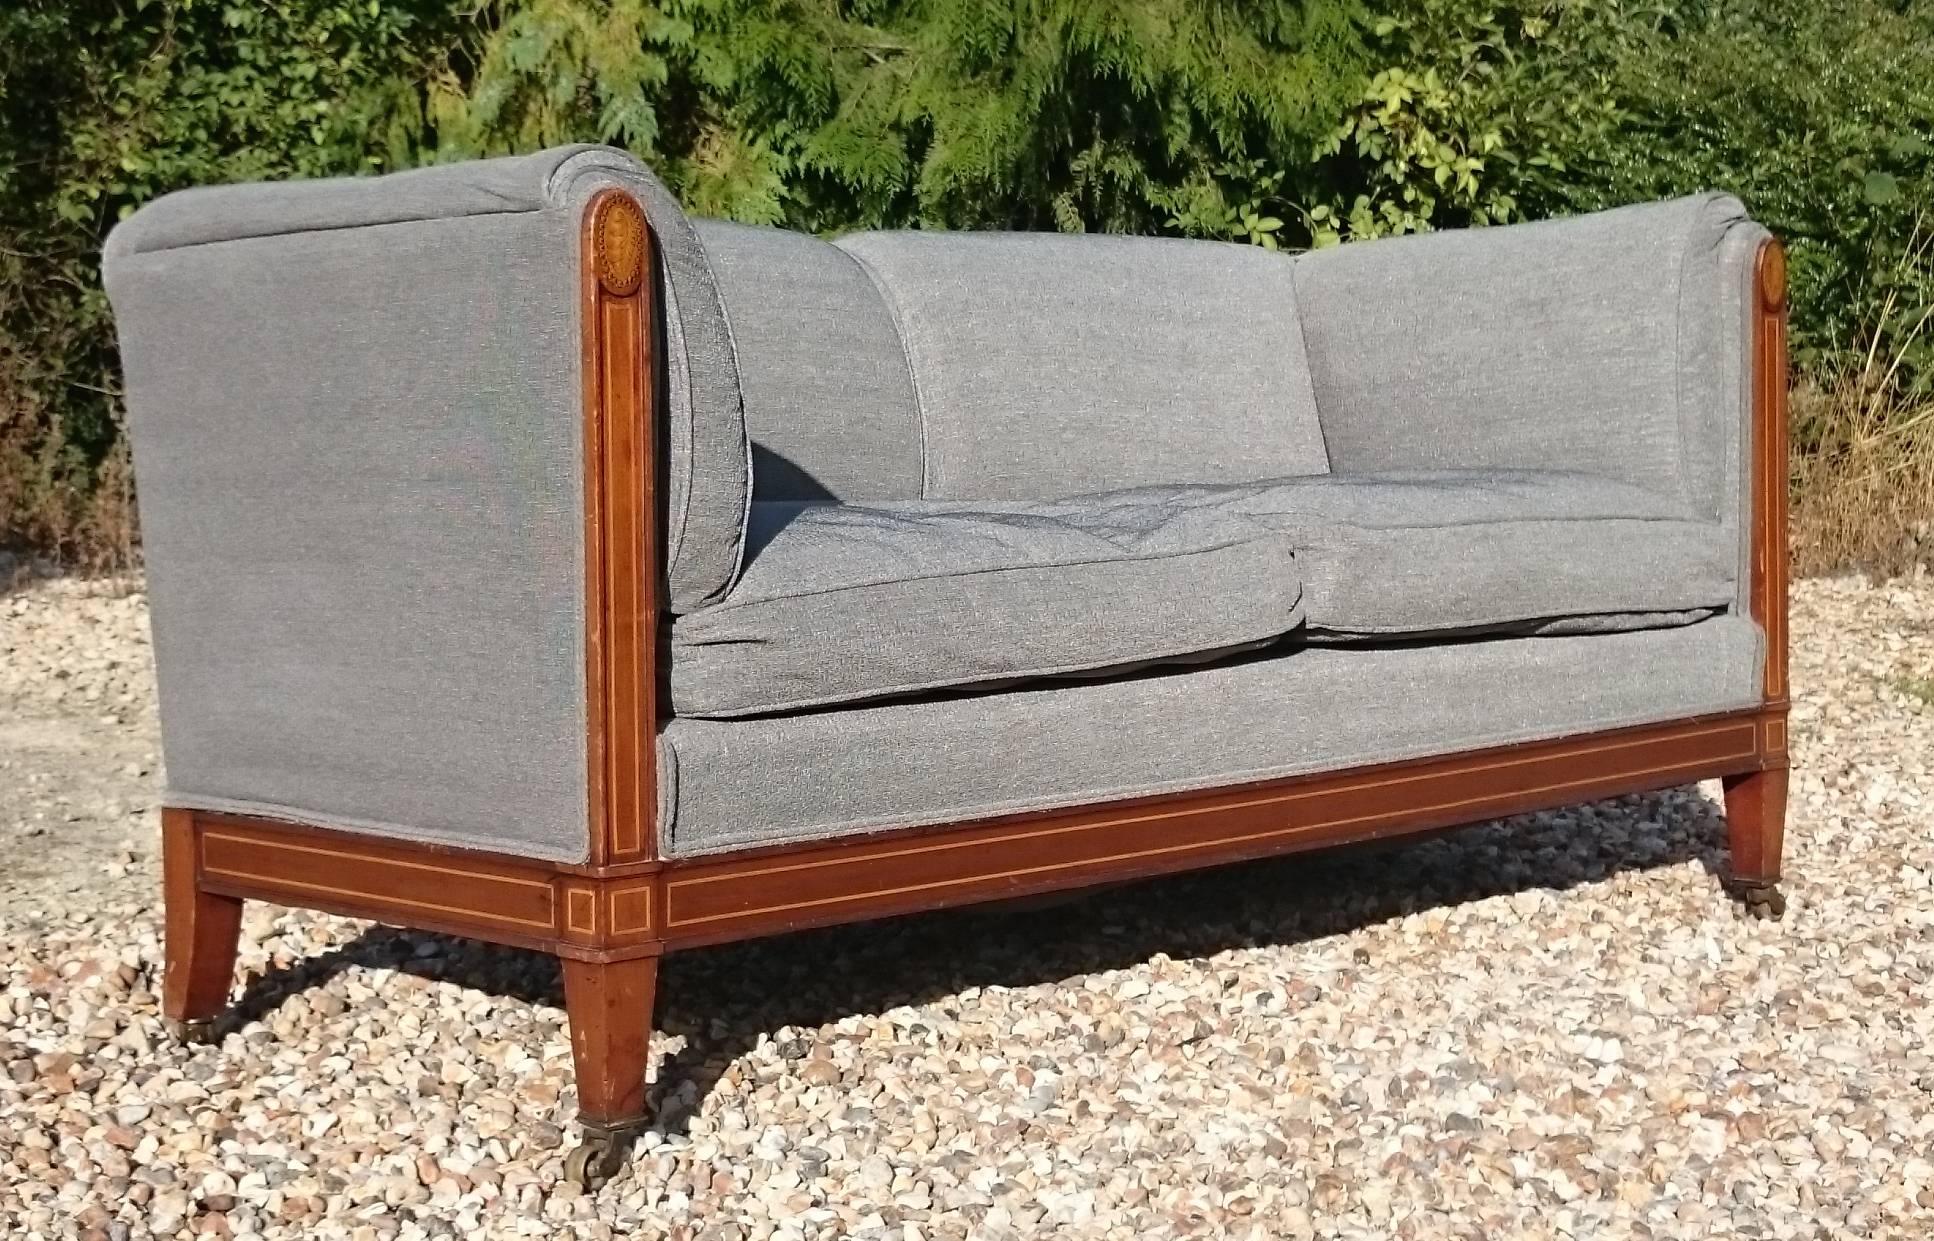 Very unusual Georgian revival sofa by Howard and Sons with mahogany show wood and box strung decoration. Howard and Sons of Berners Street in London were the foremost upholsterer of the period. They held a Royal Warrant, supplied important houses